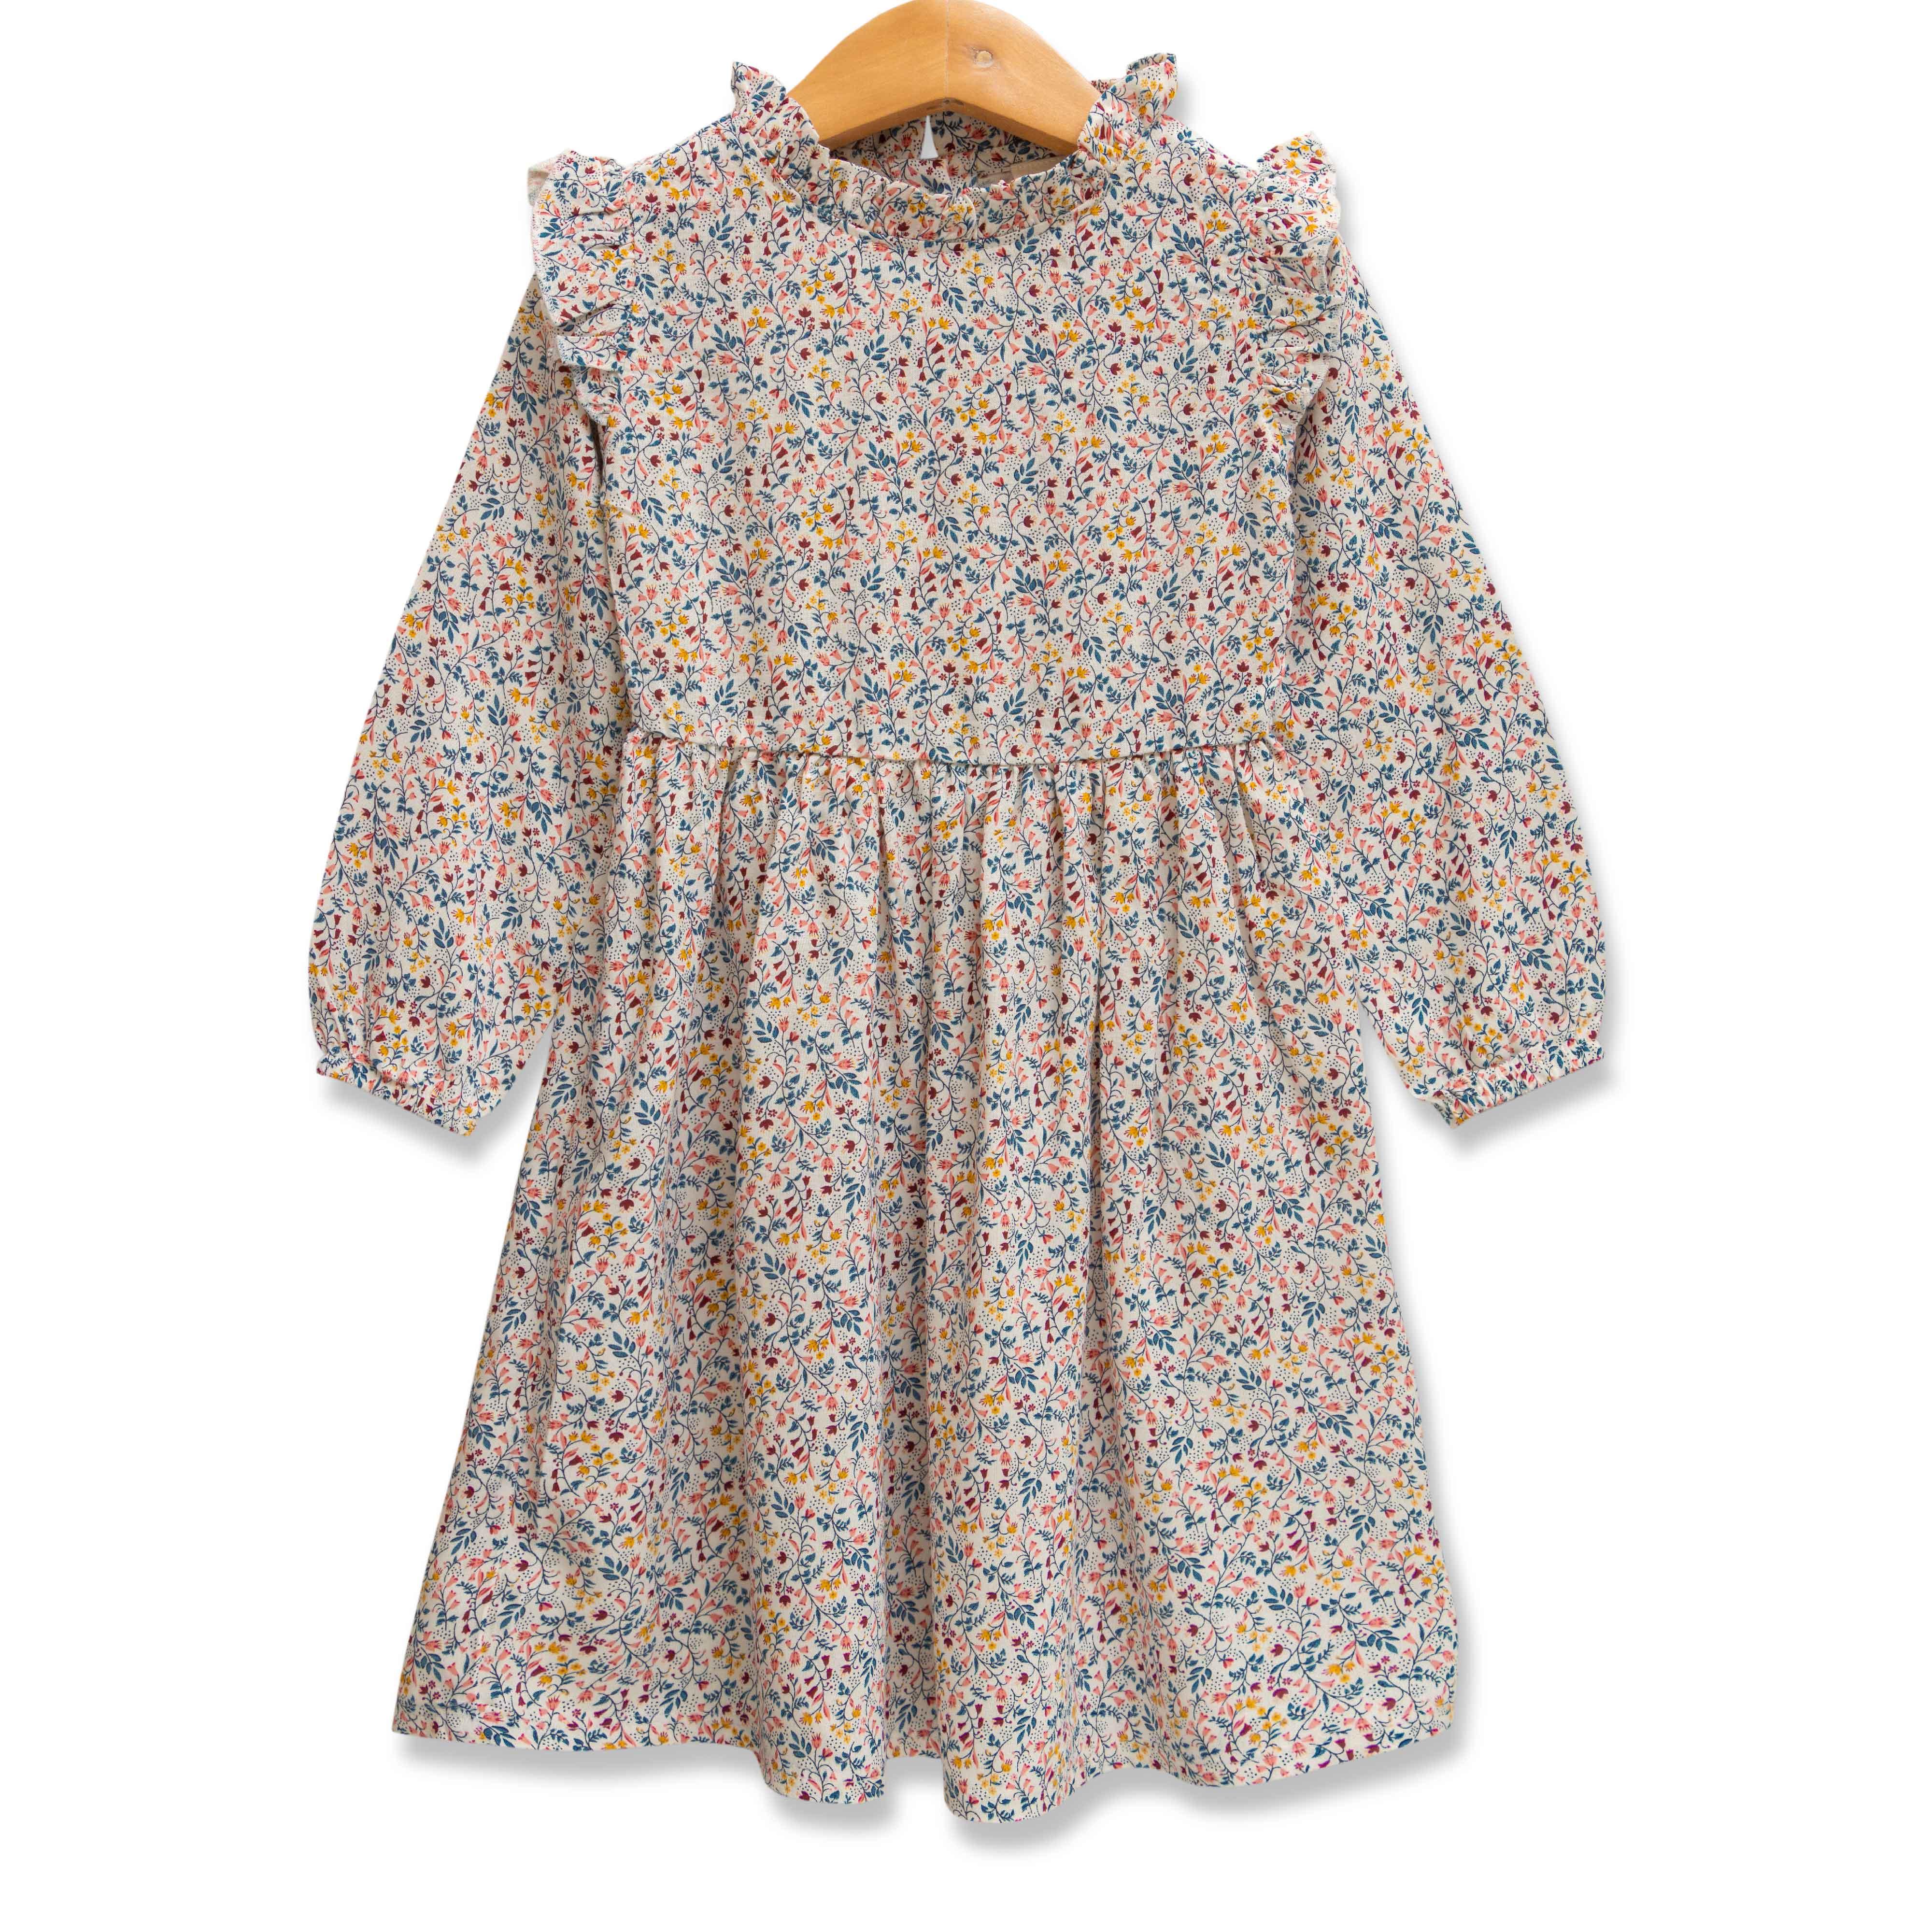 Young Girls All Over Printed Fit & Flare Dress - Juscubs